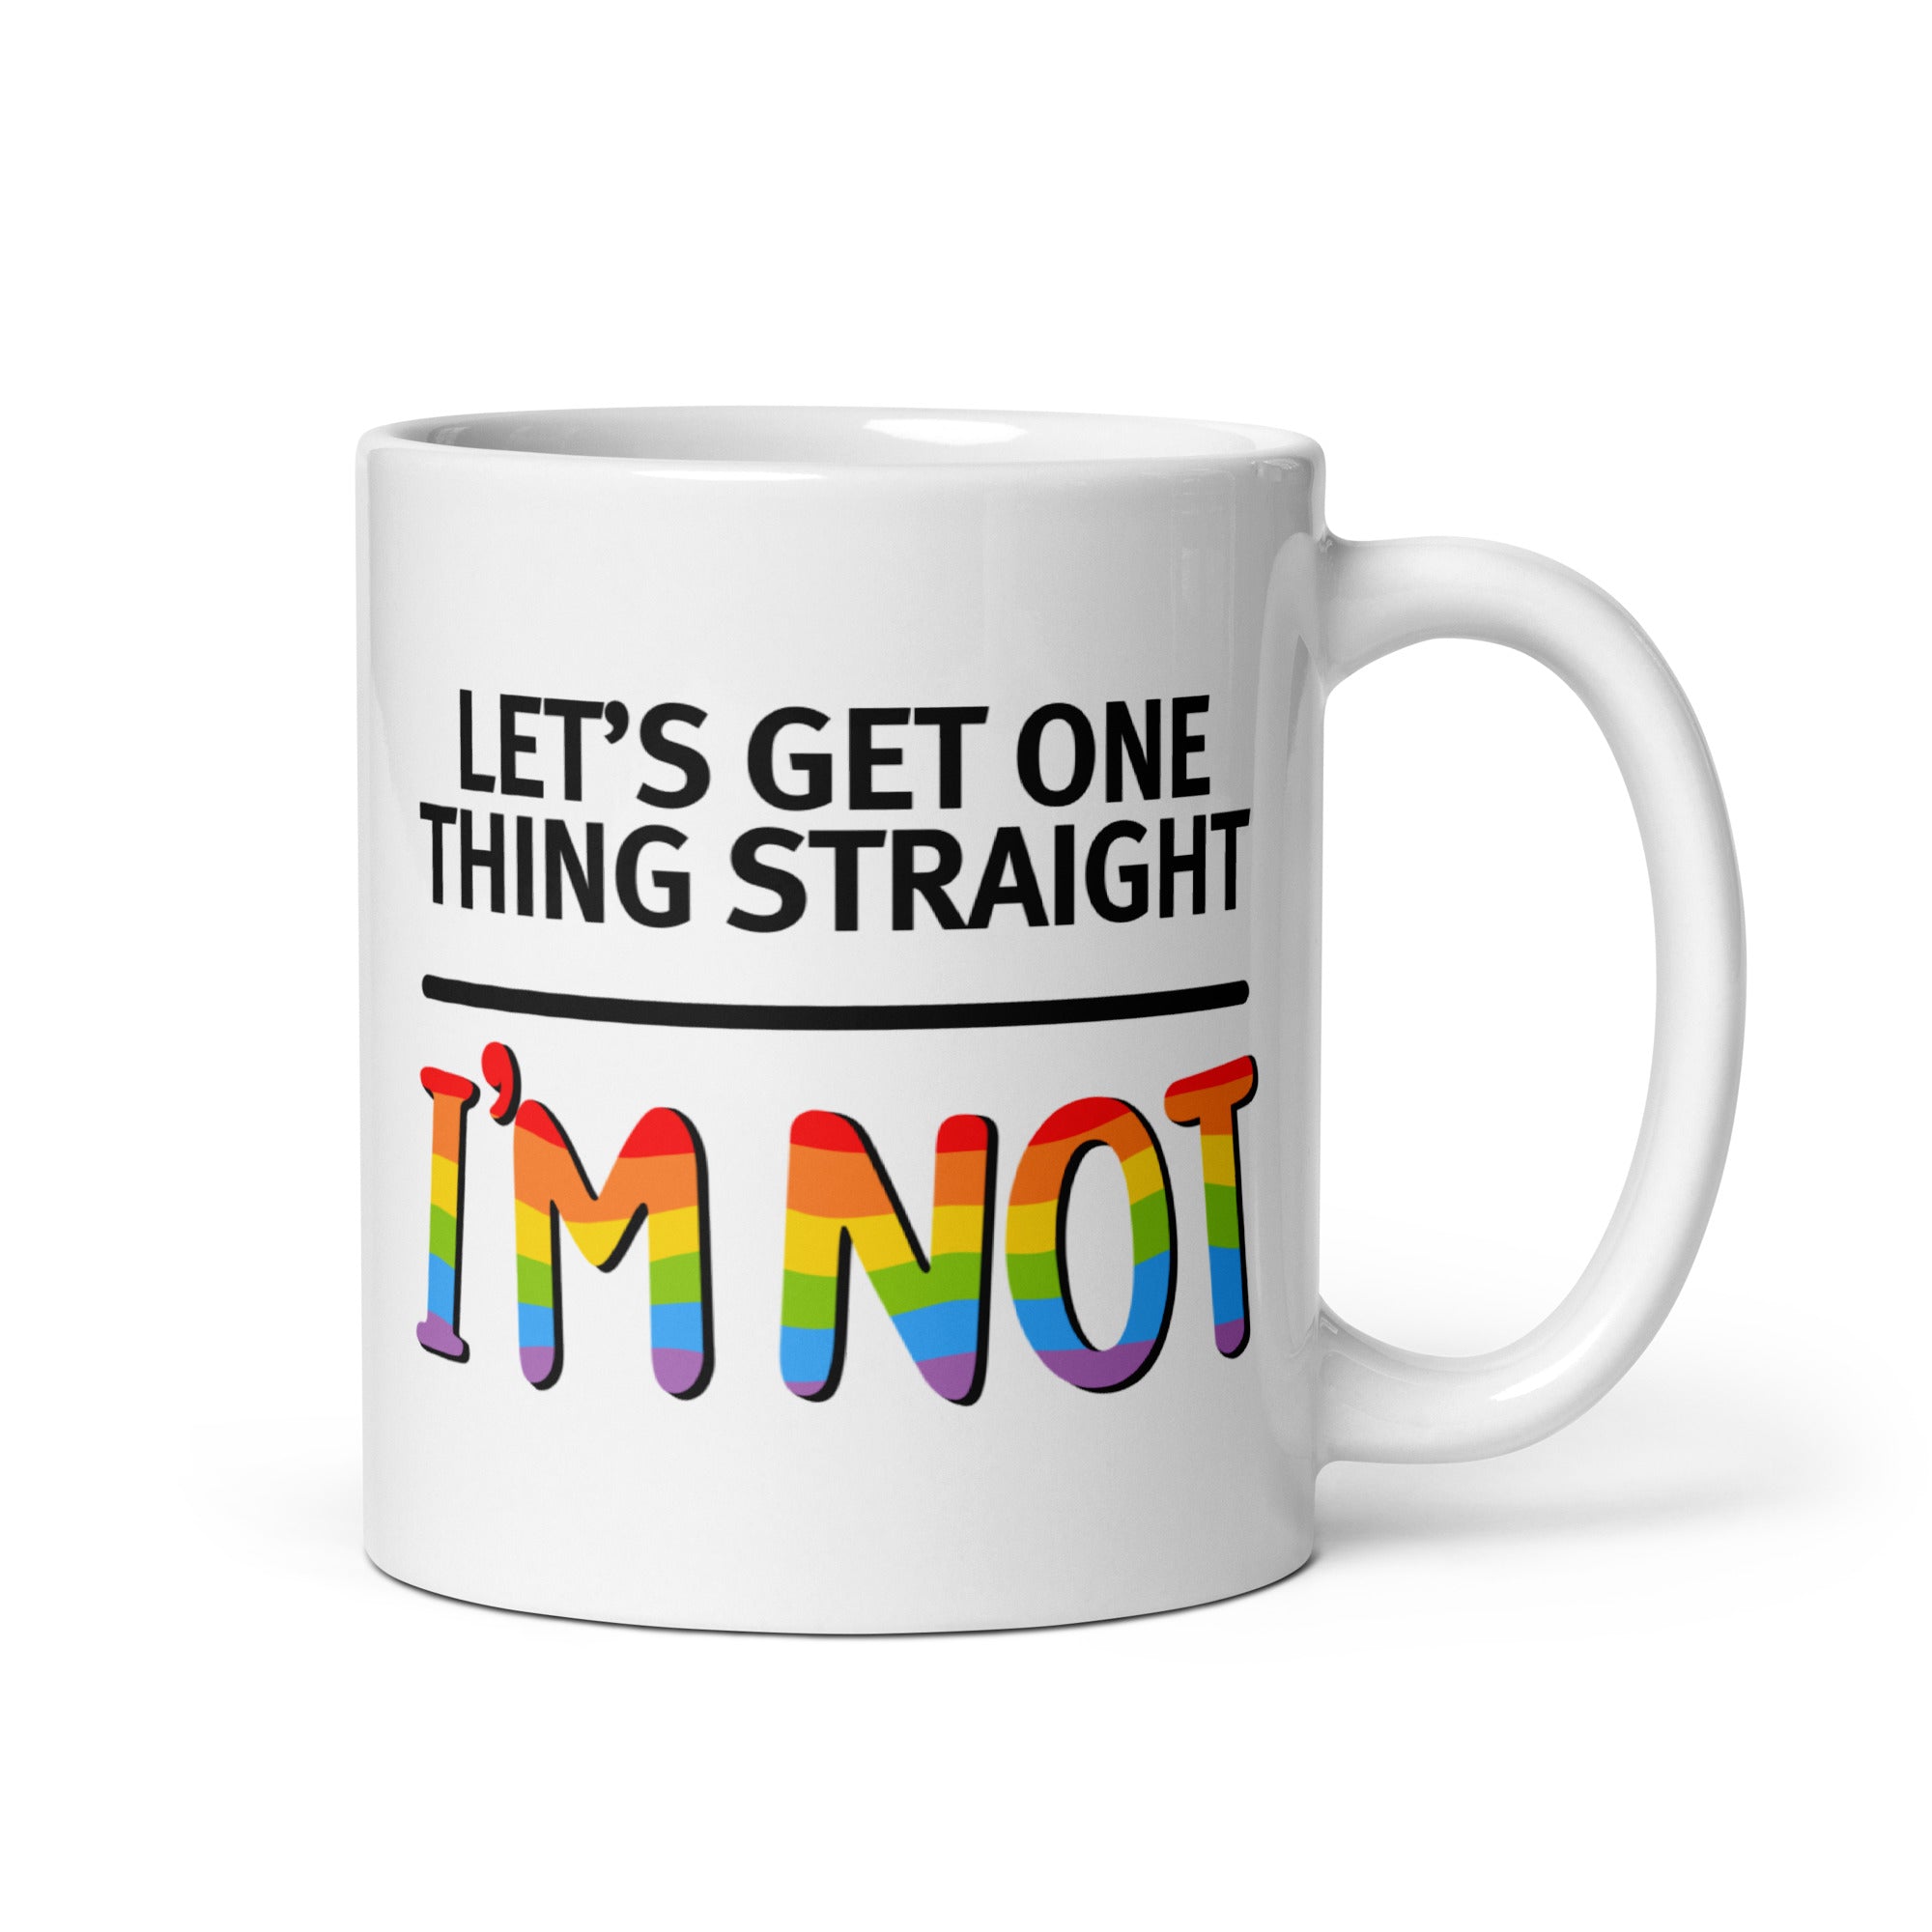 lets-get-one-thing-straight-im-not-mug